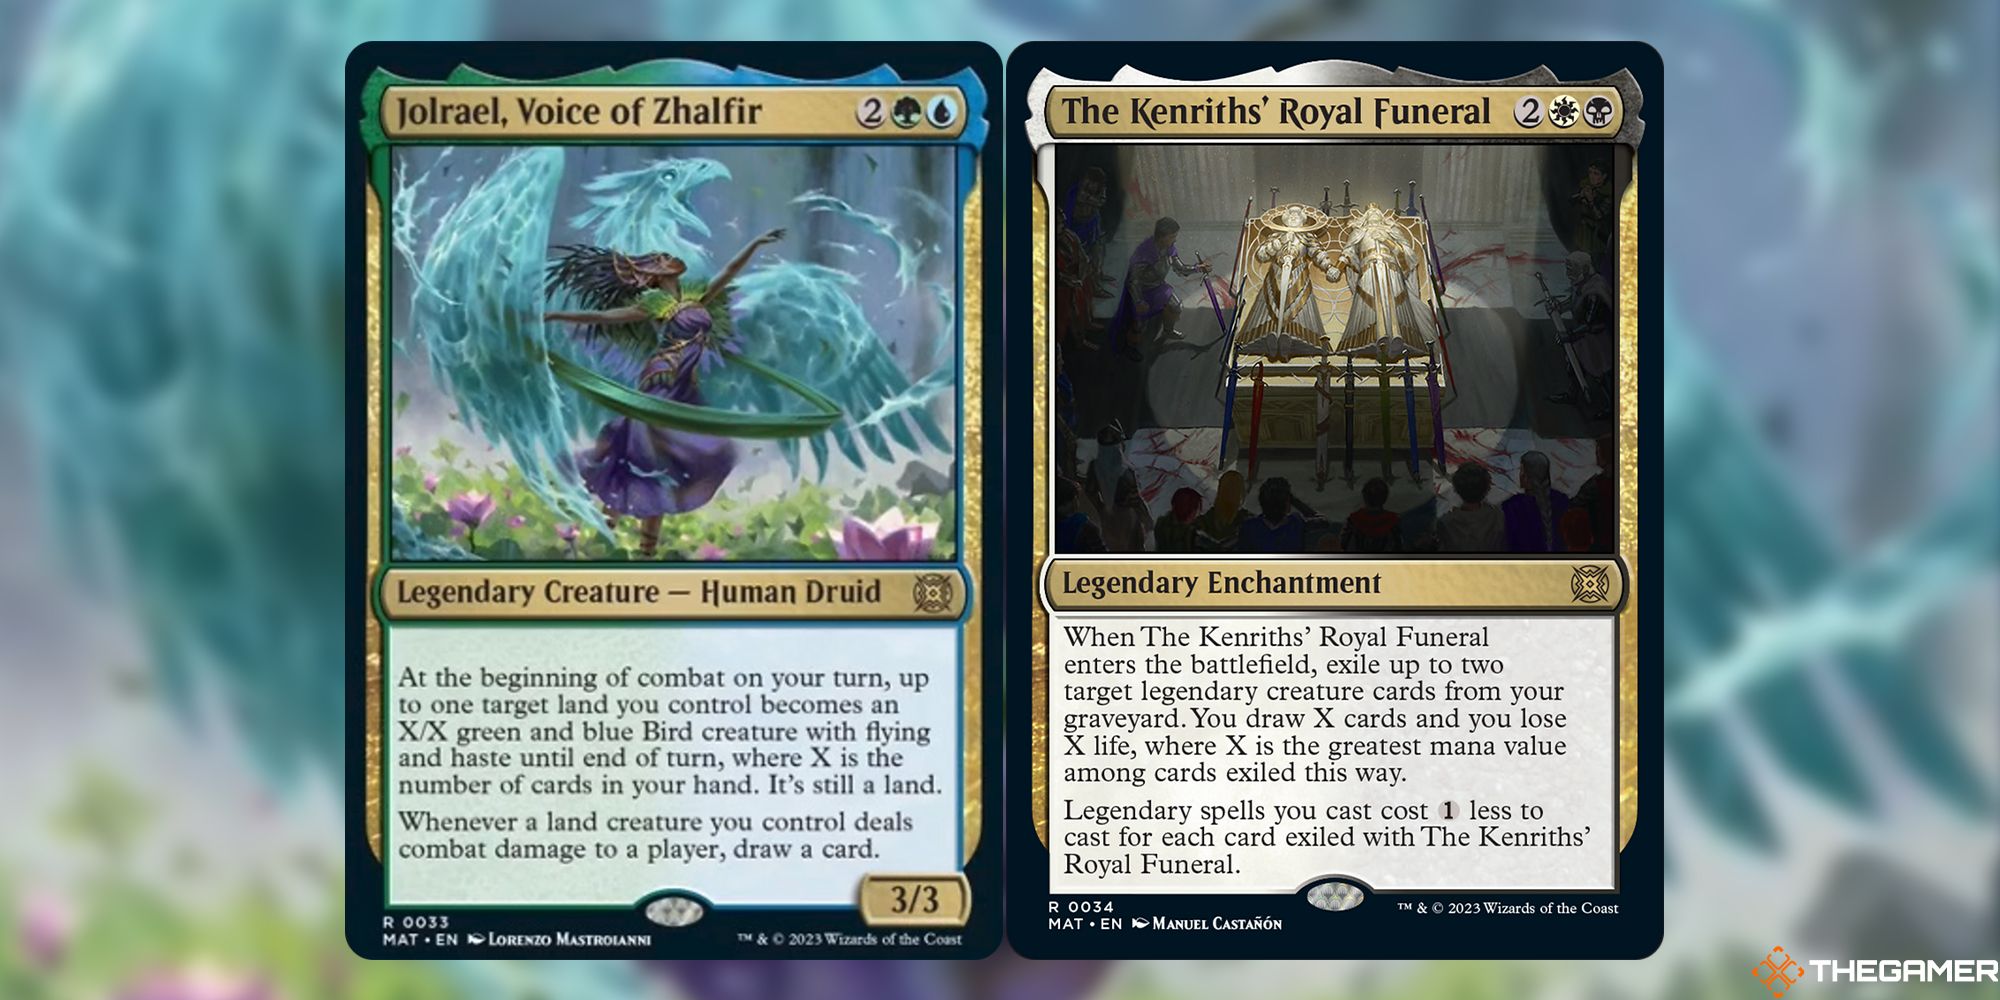 Jolrael and Zhalfir and The Kenriths' Royal Funeral from MTG